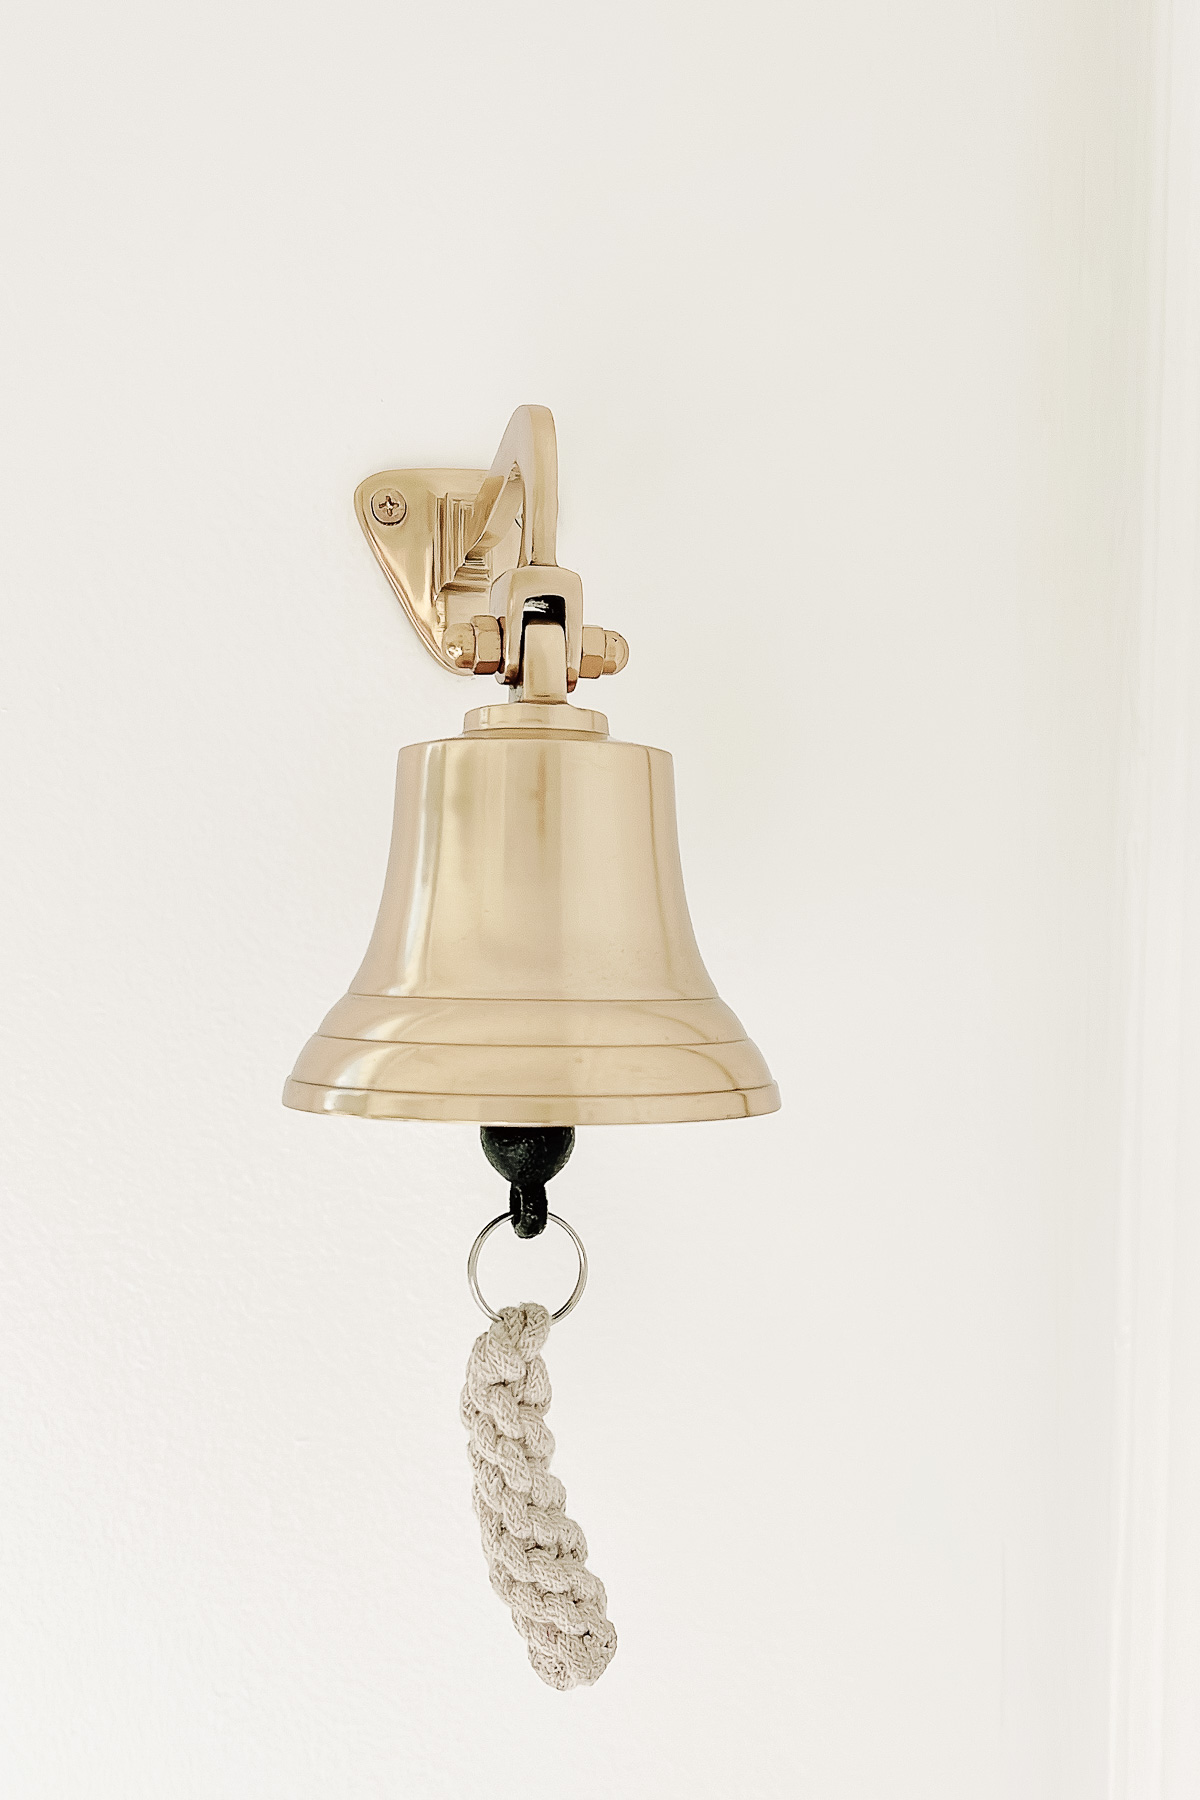 A brass bell hanging on a white wall, perfect for kitchen gifts.